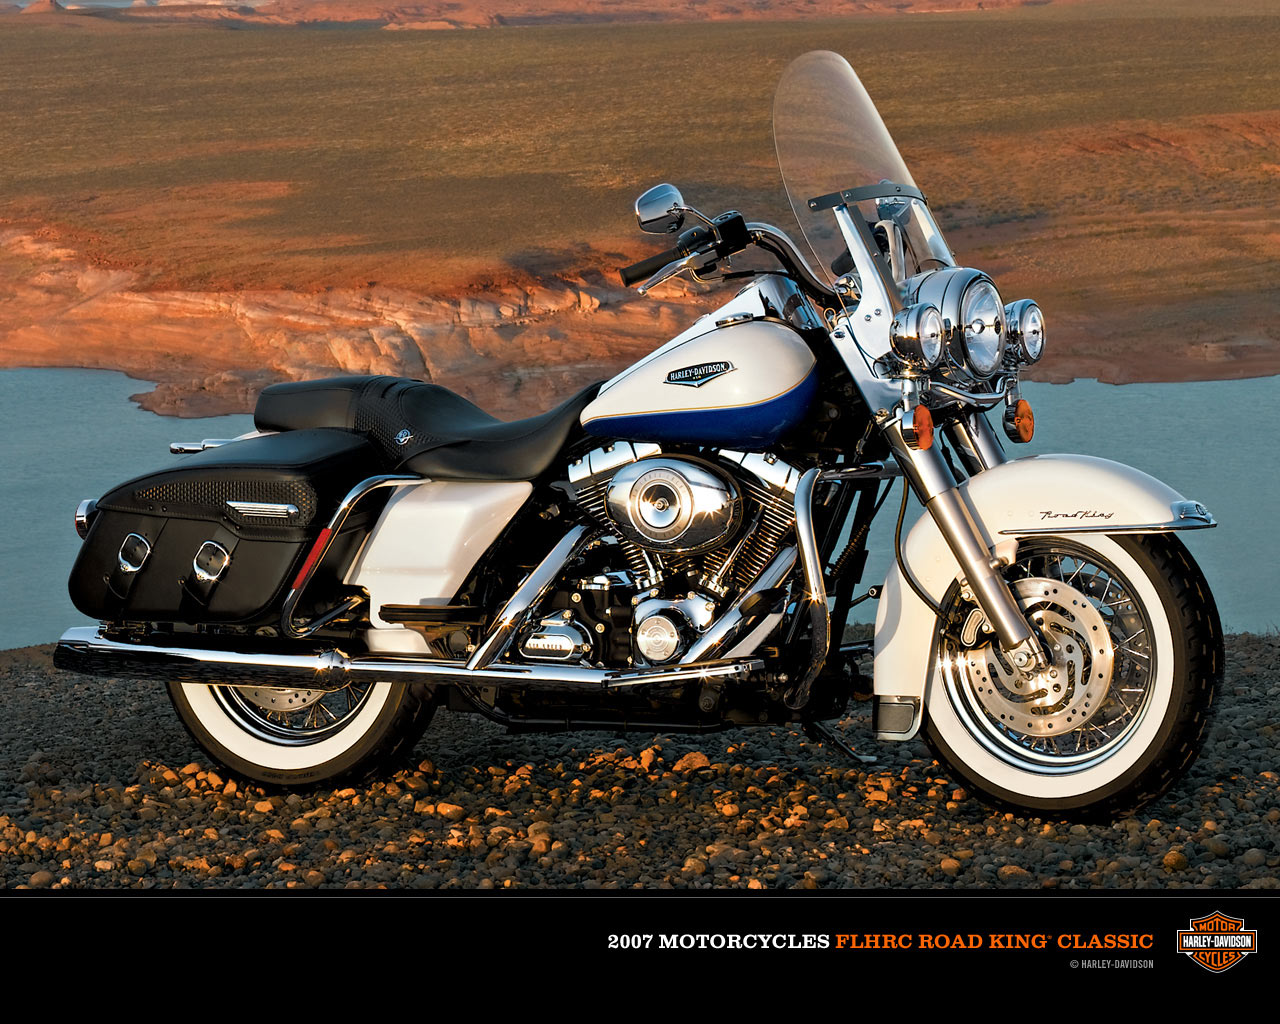 Here I Have Post The Harley Davidson Wallpaper Click Image To